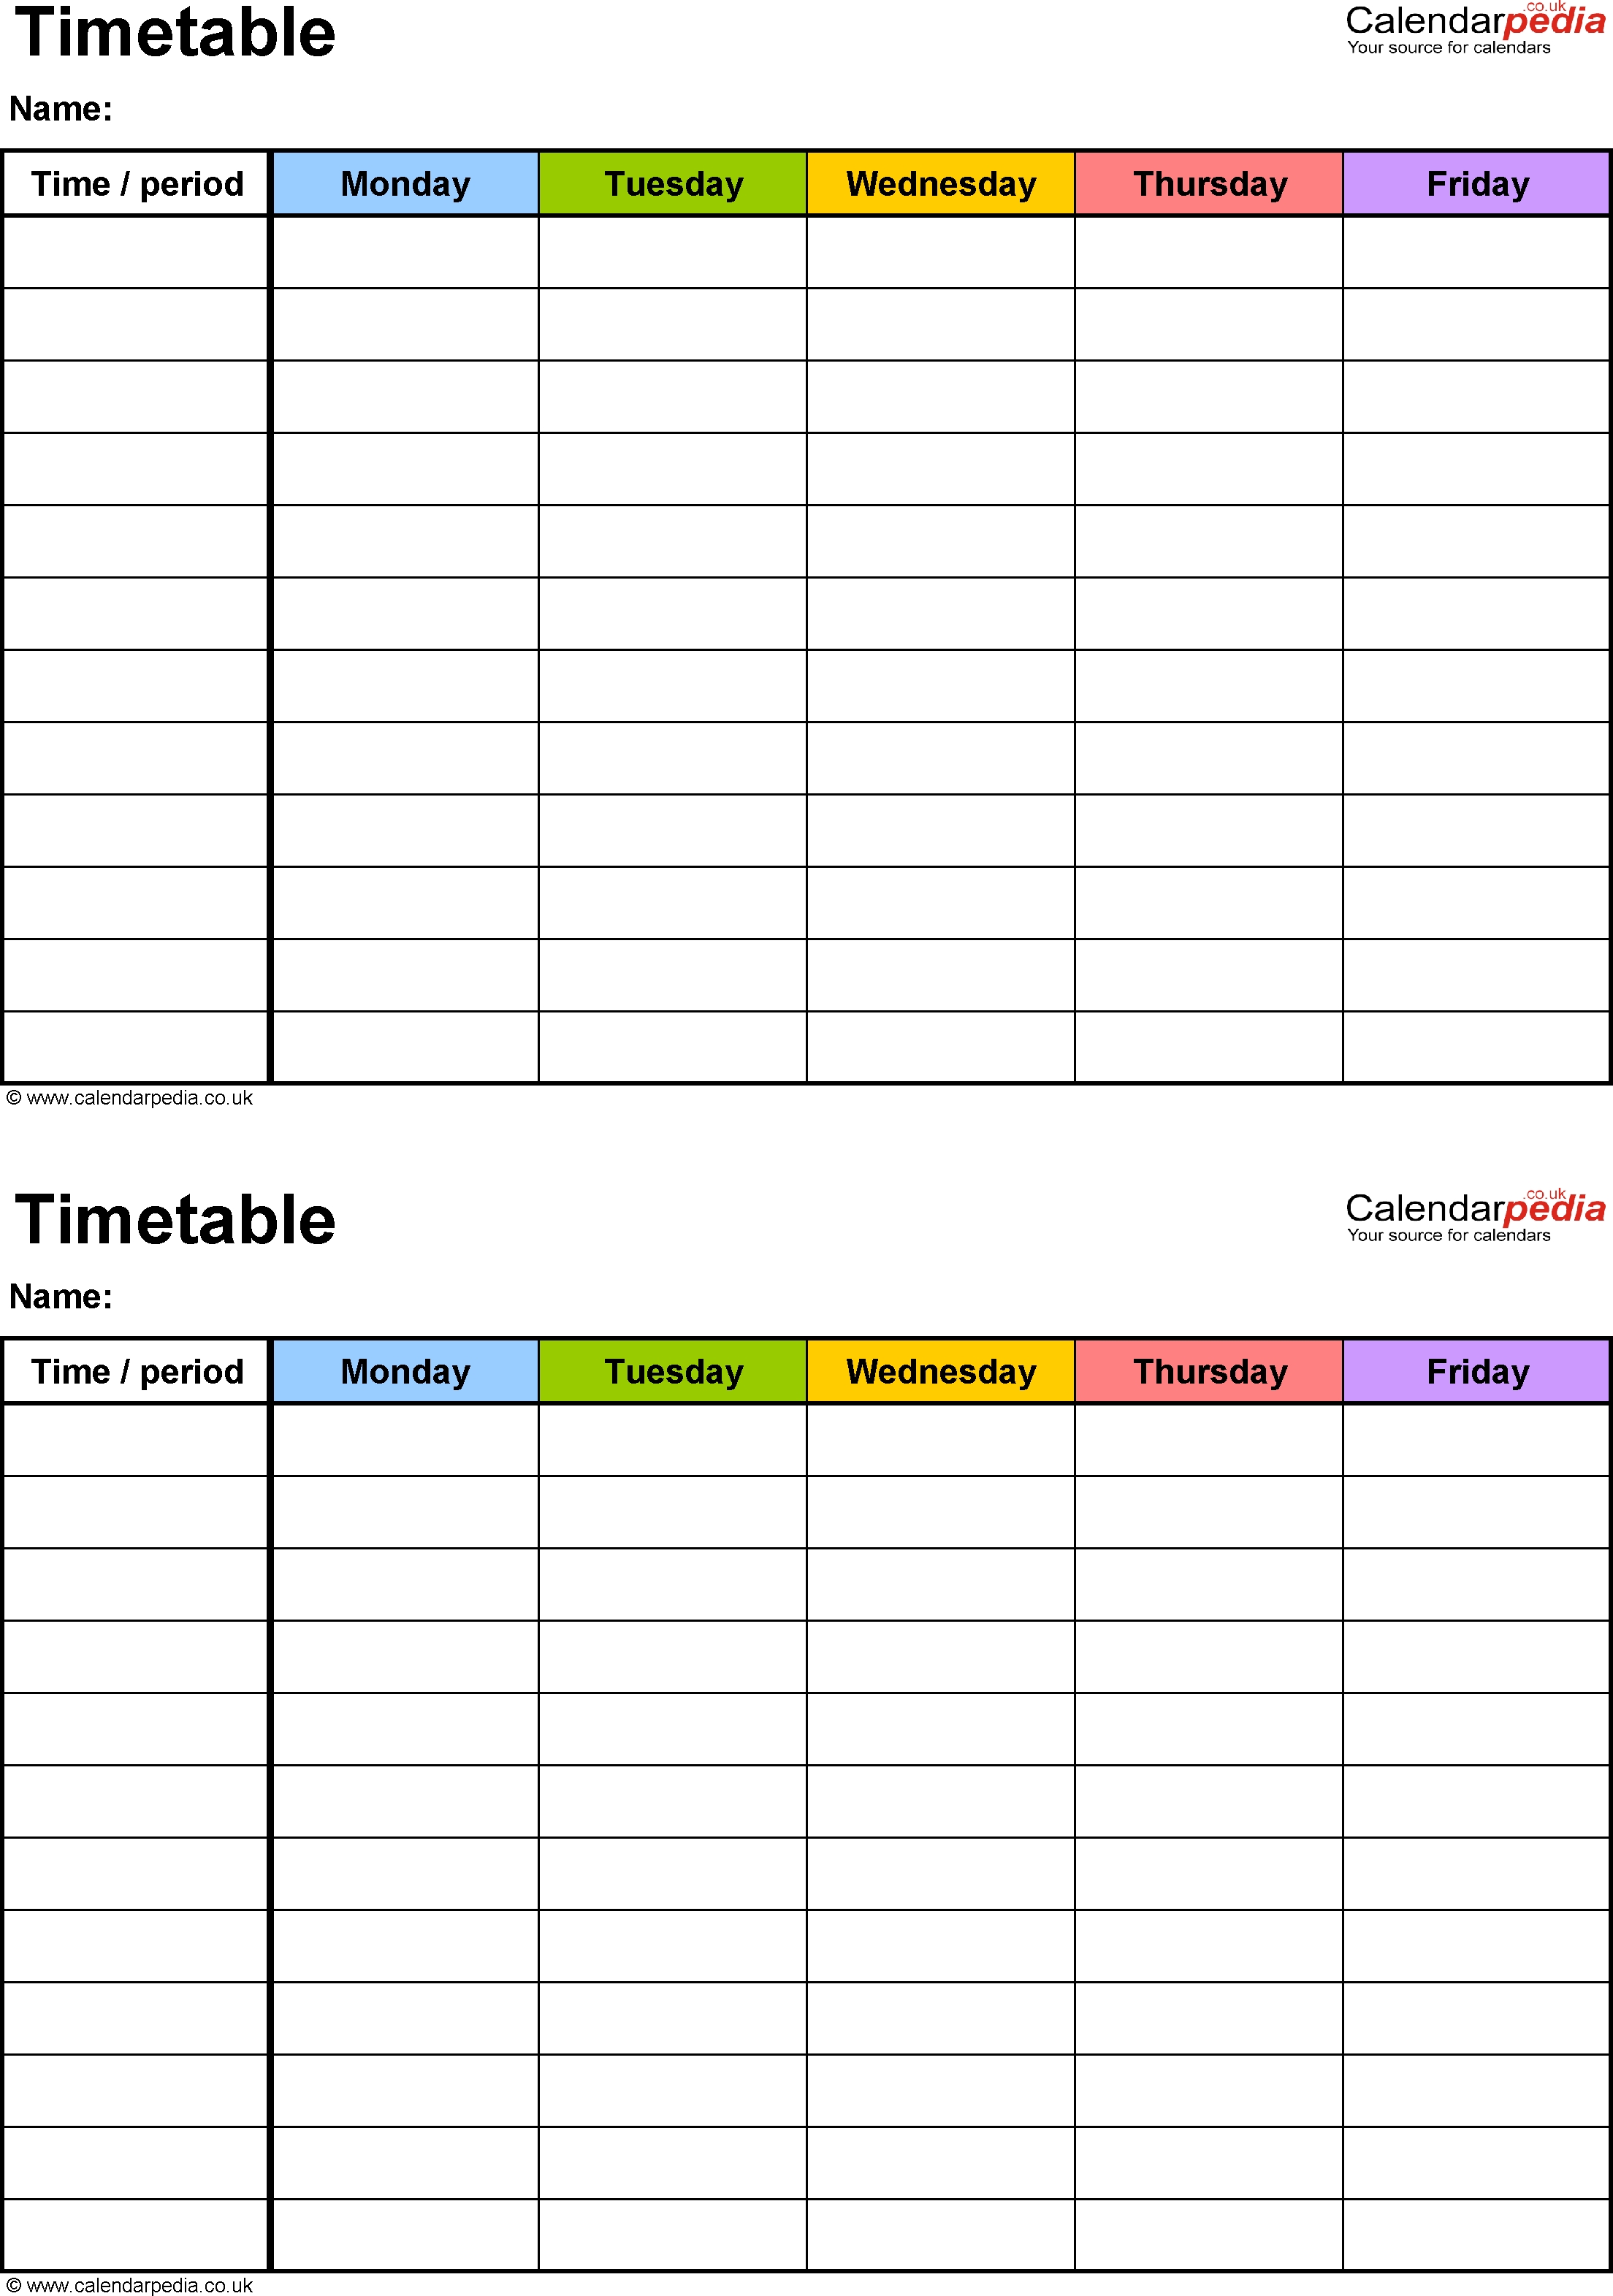 Excel Timetable Template 6: 2 A5 Timetables On One Page, Portrait regarding One Week Blank Calendar Printable